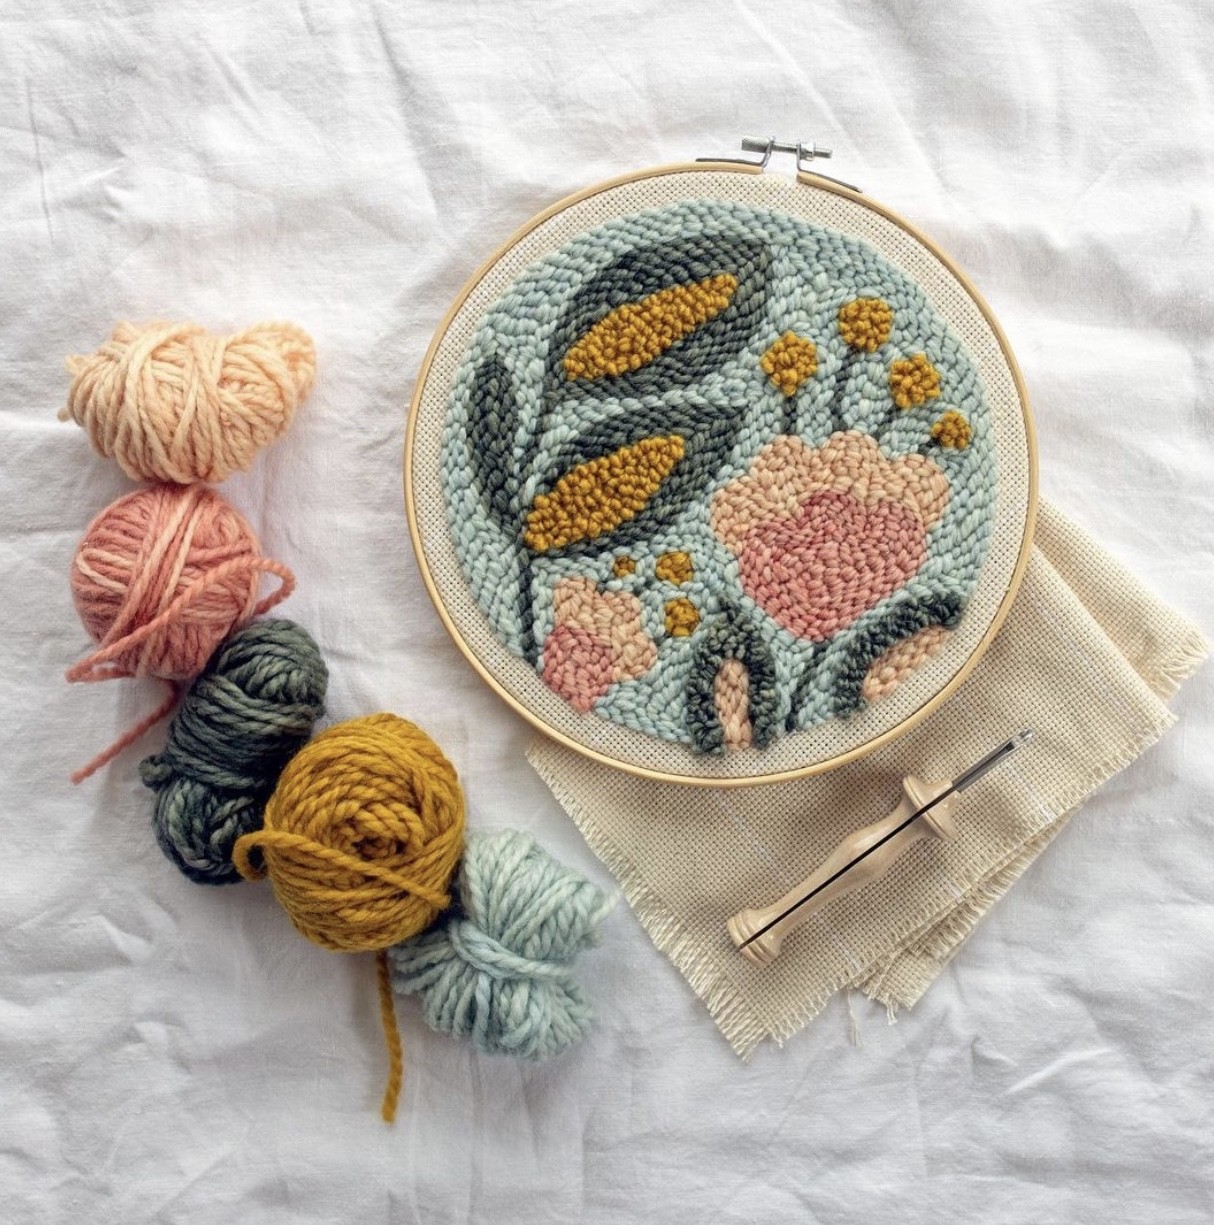 Fabric is pulled tightly in the hoop for the Brilliant Botanicals punch needle pattern. Punch needle supplies surround this project.